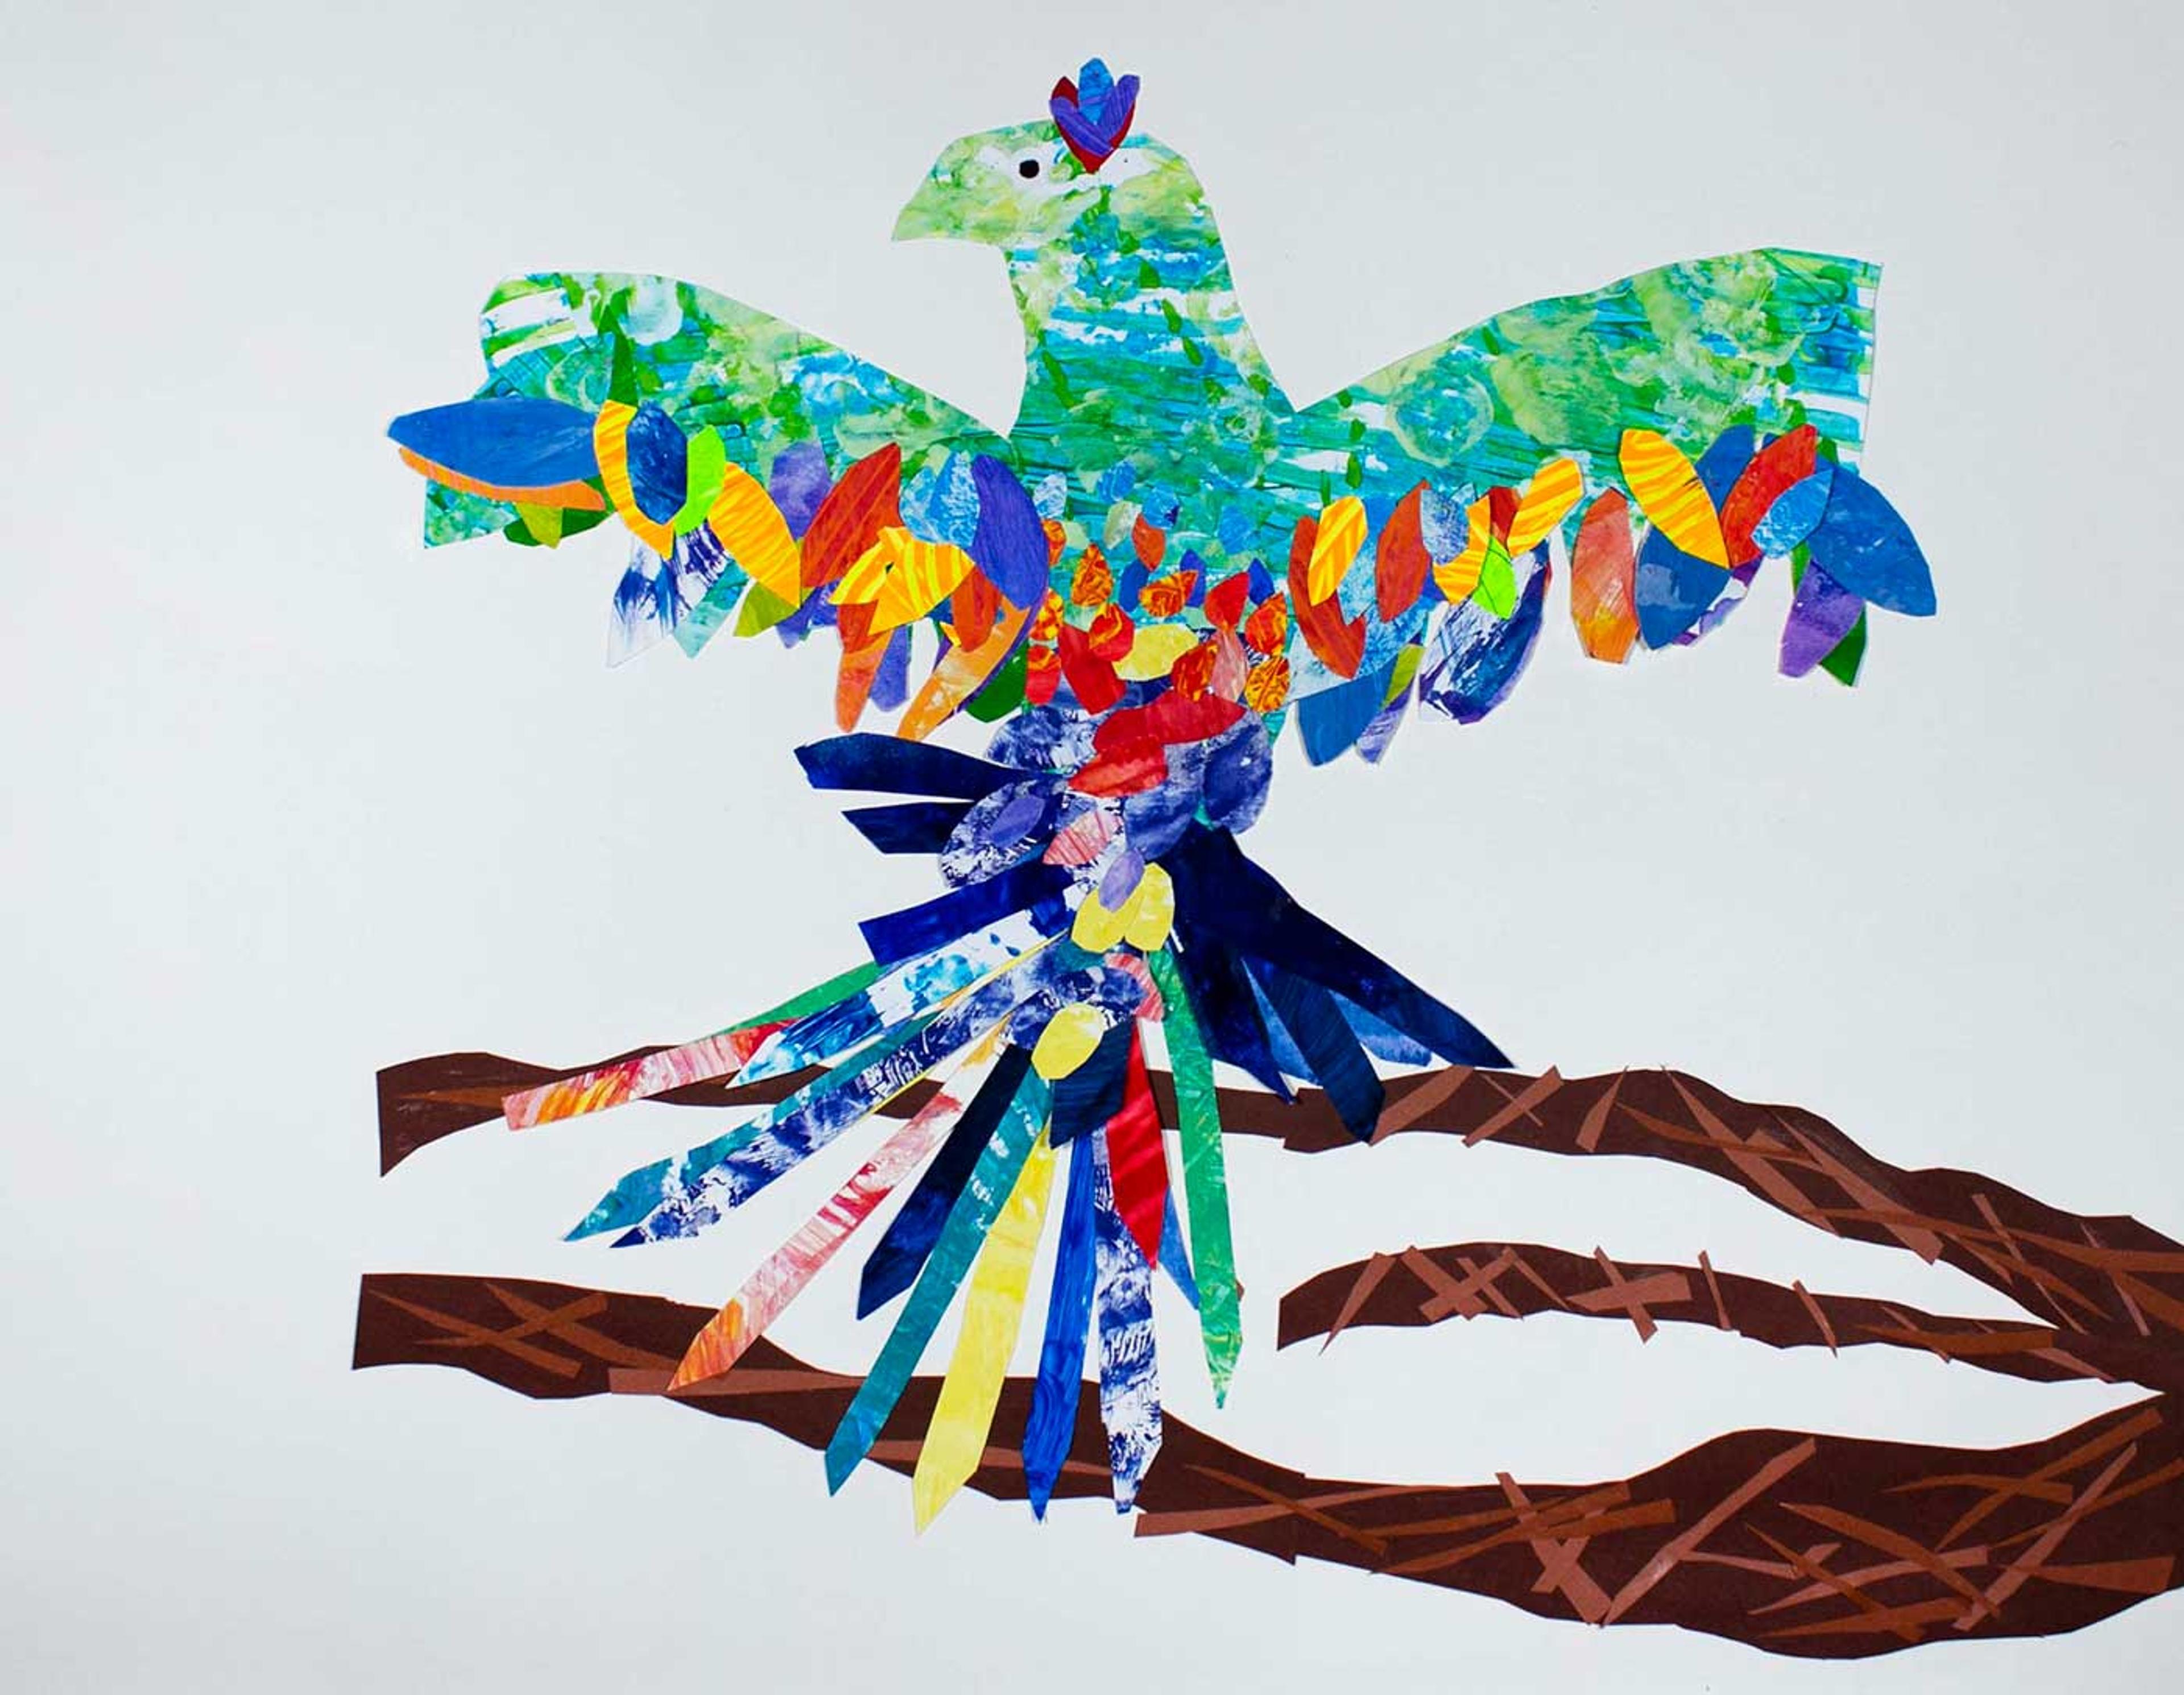 Collage of a colorful bird with its wings spread sitting on a branch.